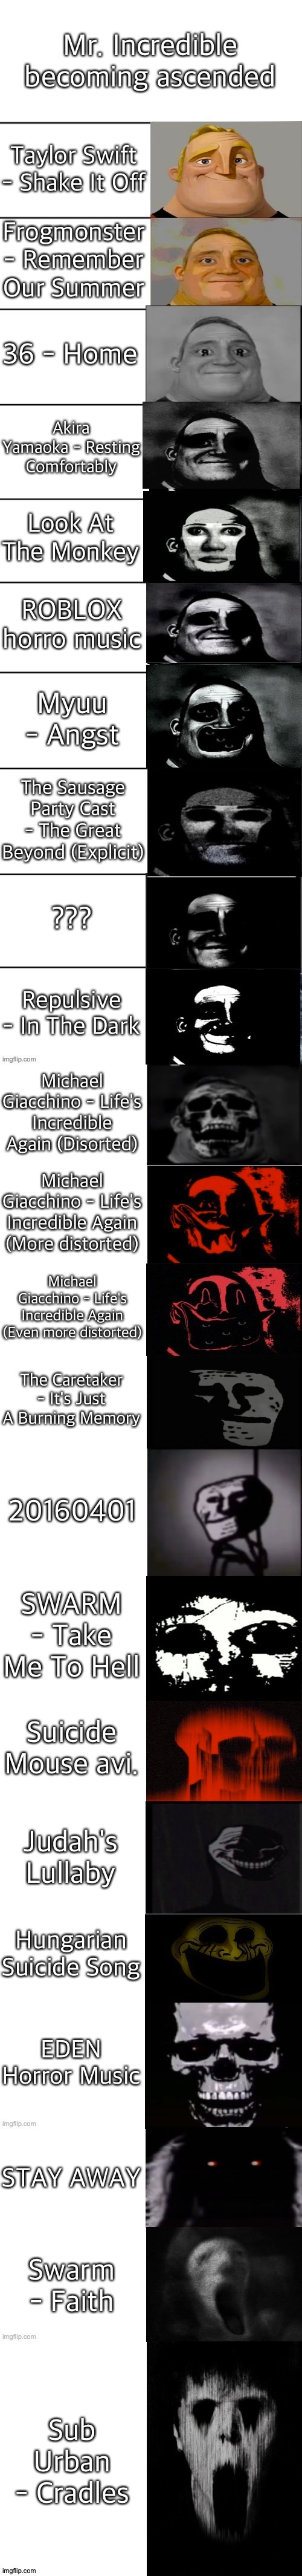 Mr. Incredible becoming ascended | Mr. Incredible becoming ascended; Taylor Swift - Shake It Off; Frogmonster - Remember Our Summer; 36 - Home; Akira Yamaoka - Resting Comfortably; Look At The Monkey; ROBLOX horro music; Myuu - Angst; The Sausage Party Cast - The Great Beyond (Explicit); ??? Repulsive - In The Dark; Michael Giacchino - Life's Incredible Again (Disorted); Michael Giacchino - Life's Incredible Again (More distorted); Michael Giacchino - Life's Incredible Again (Even more distorted); The Caretaker - It's Just A Burning Memory; 20160401; SWARM - Take Me To Hell; Suicide Mouse avi. Judah's Lullaby; Hungarian Suicide Song; EDEN Horror Music; STAY AWAY; Swarm - Faith; Sub Urban - Cradles | image tagged in bob parr becoming uncanny 2nd extended | made w/ Imgflip meme maker